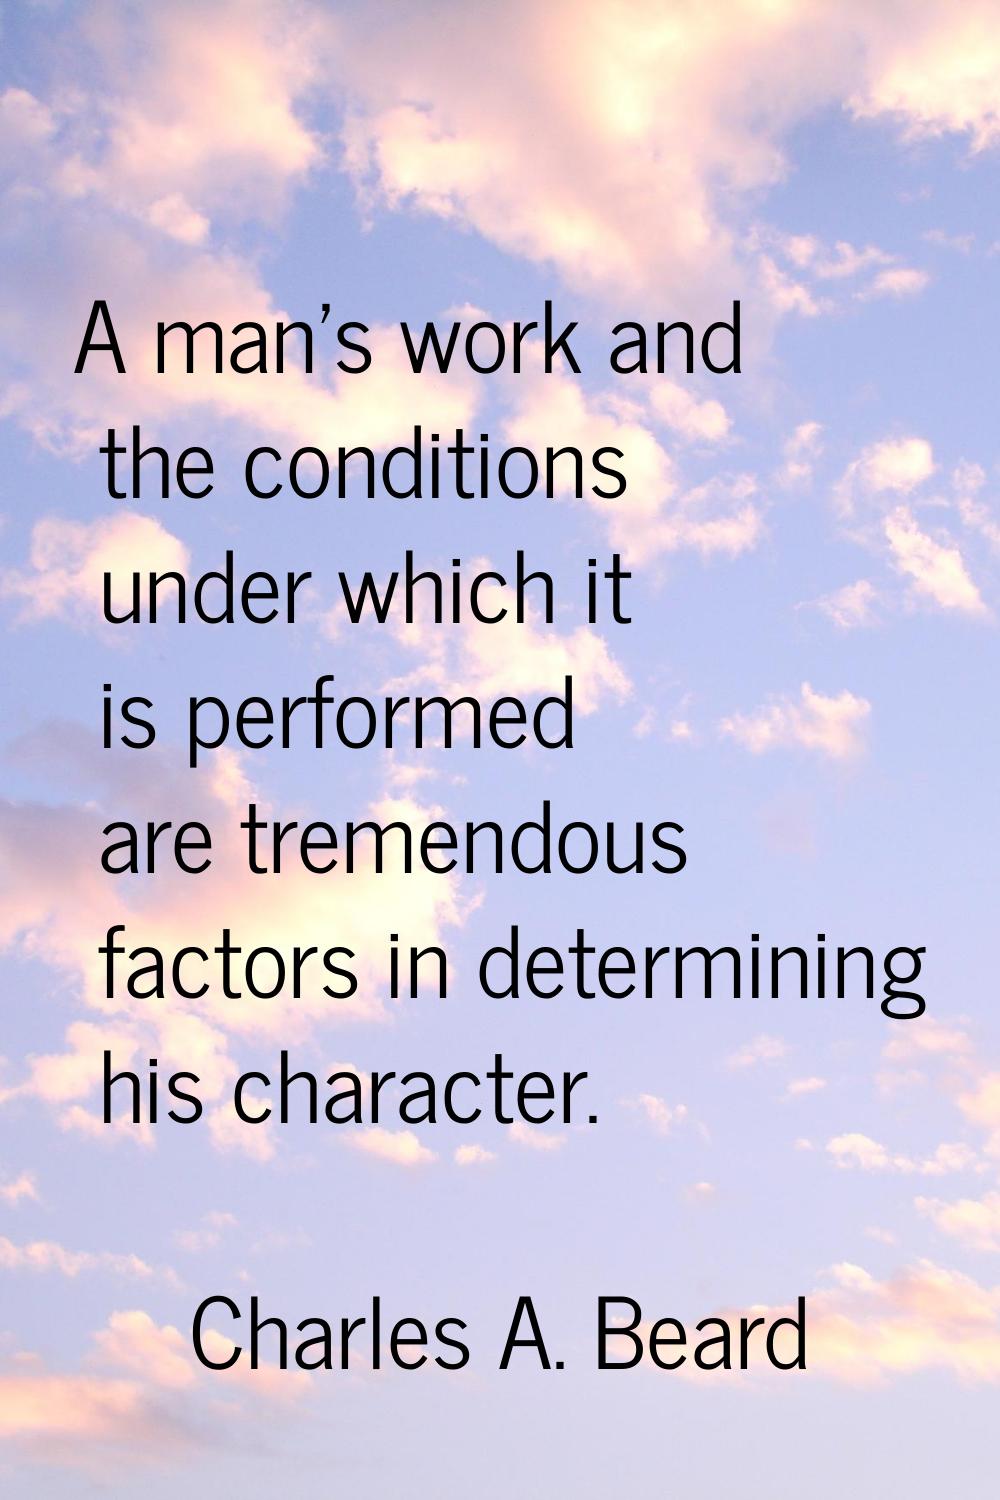 A man's work and the conditions under which it is performed are tremendous factors in determining h